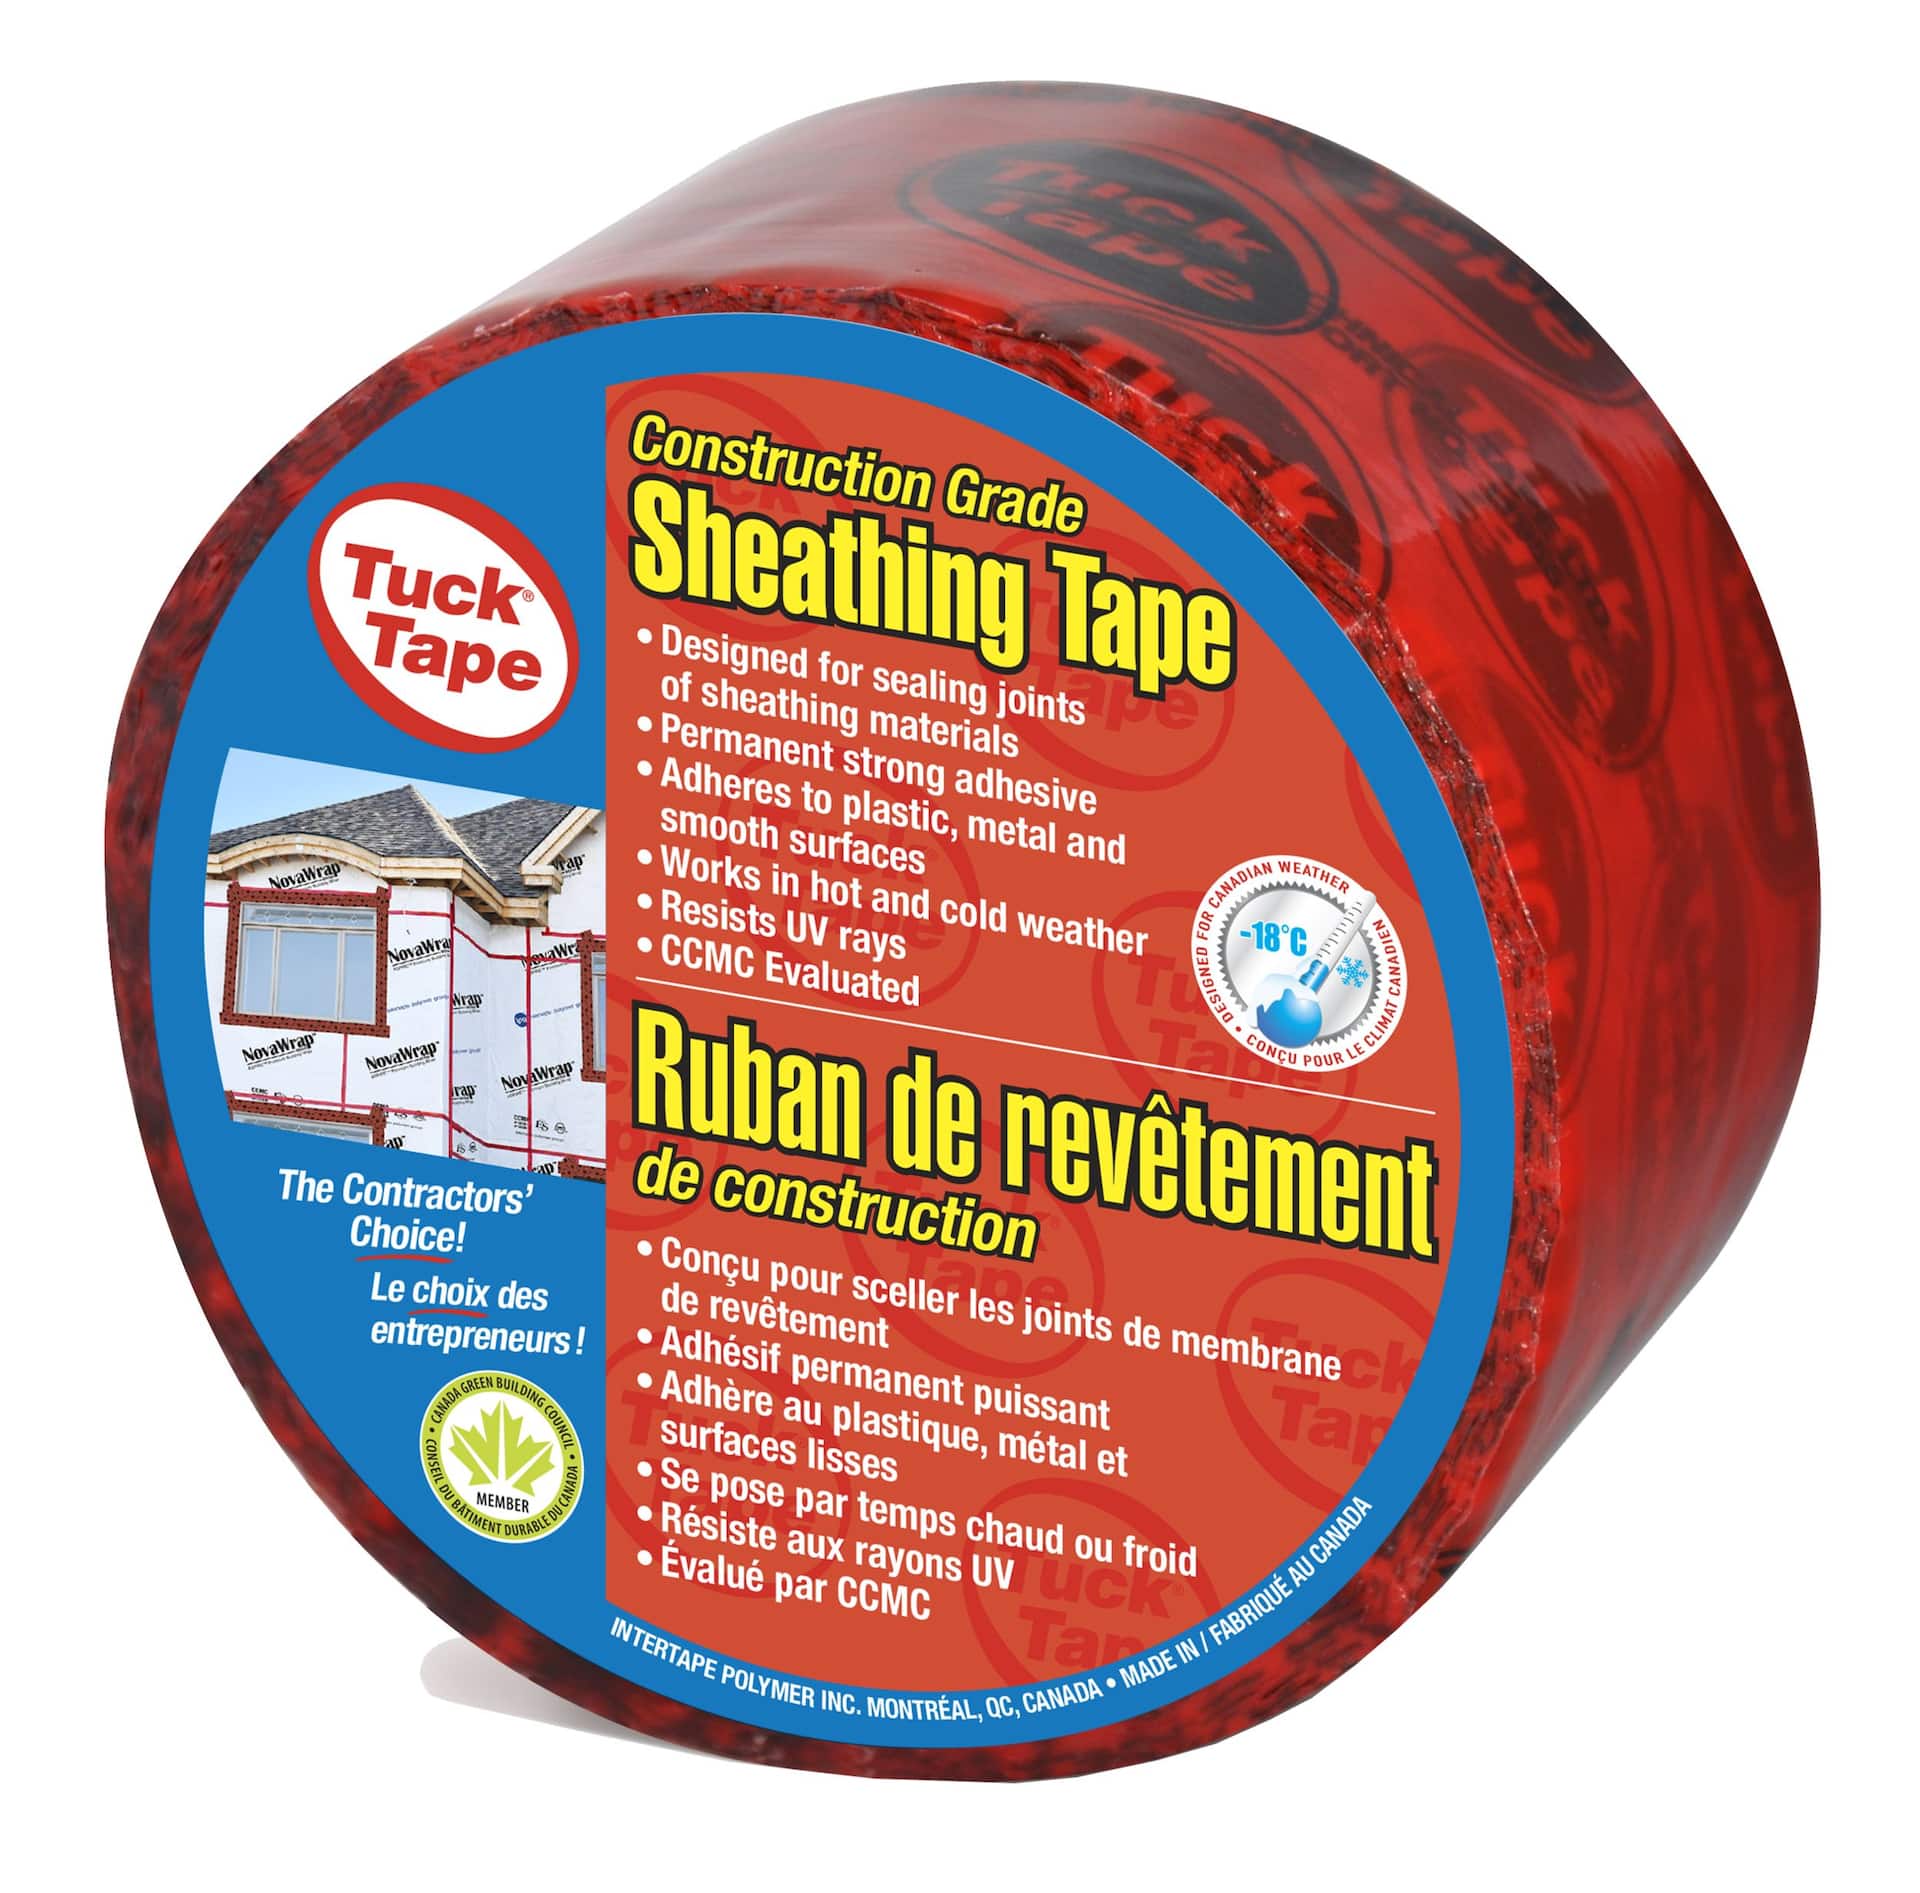 Tuck Tape Construction Grade Sheathing Tape, Weather & Water-Resistant, Red,  60-mm x 55-m